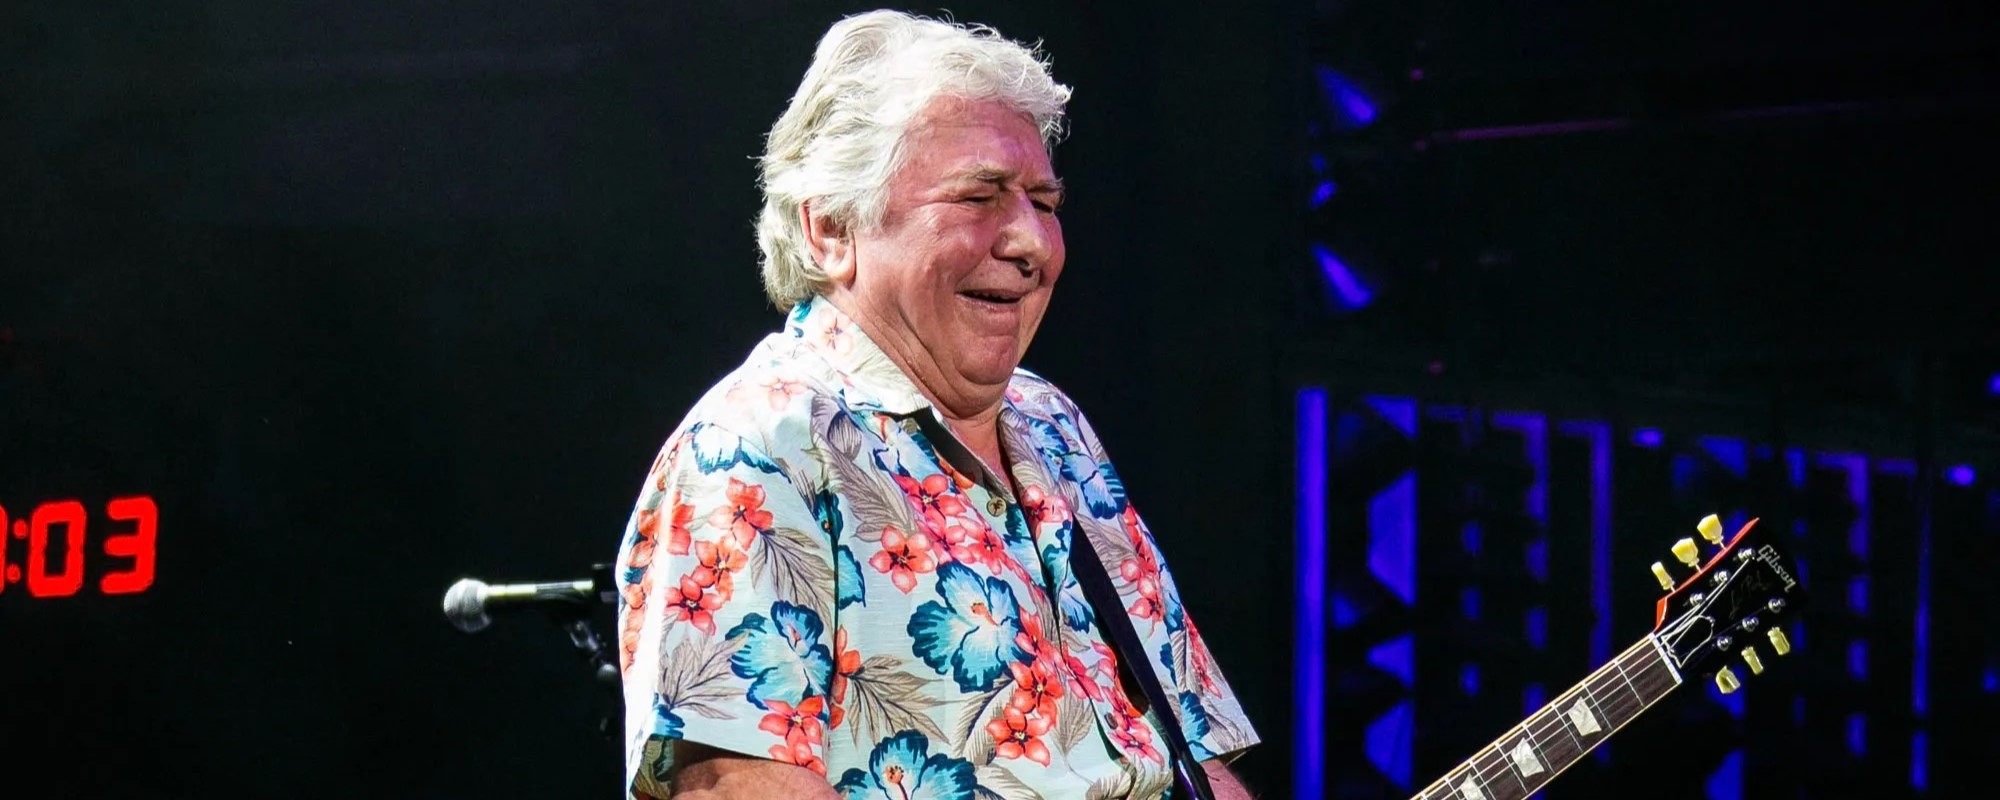 5 Classic Songs Featuring Mott the Hoople/Bad Company Guitarist Mick Ralphs